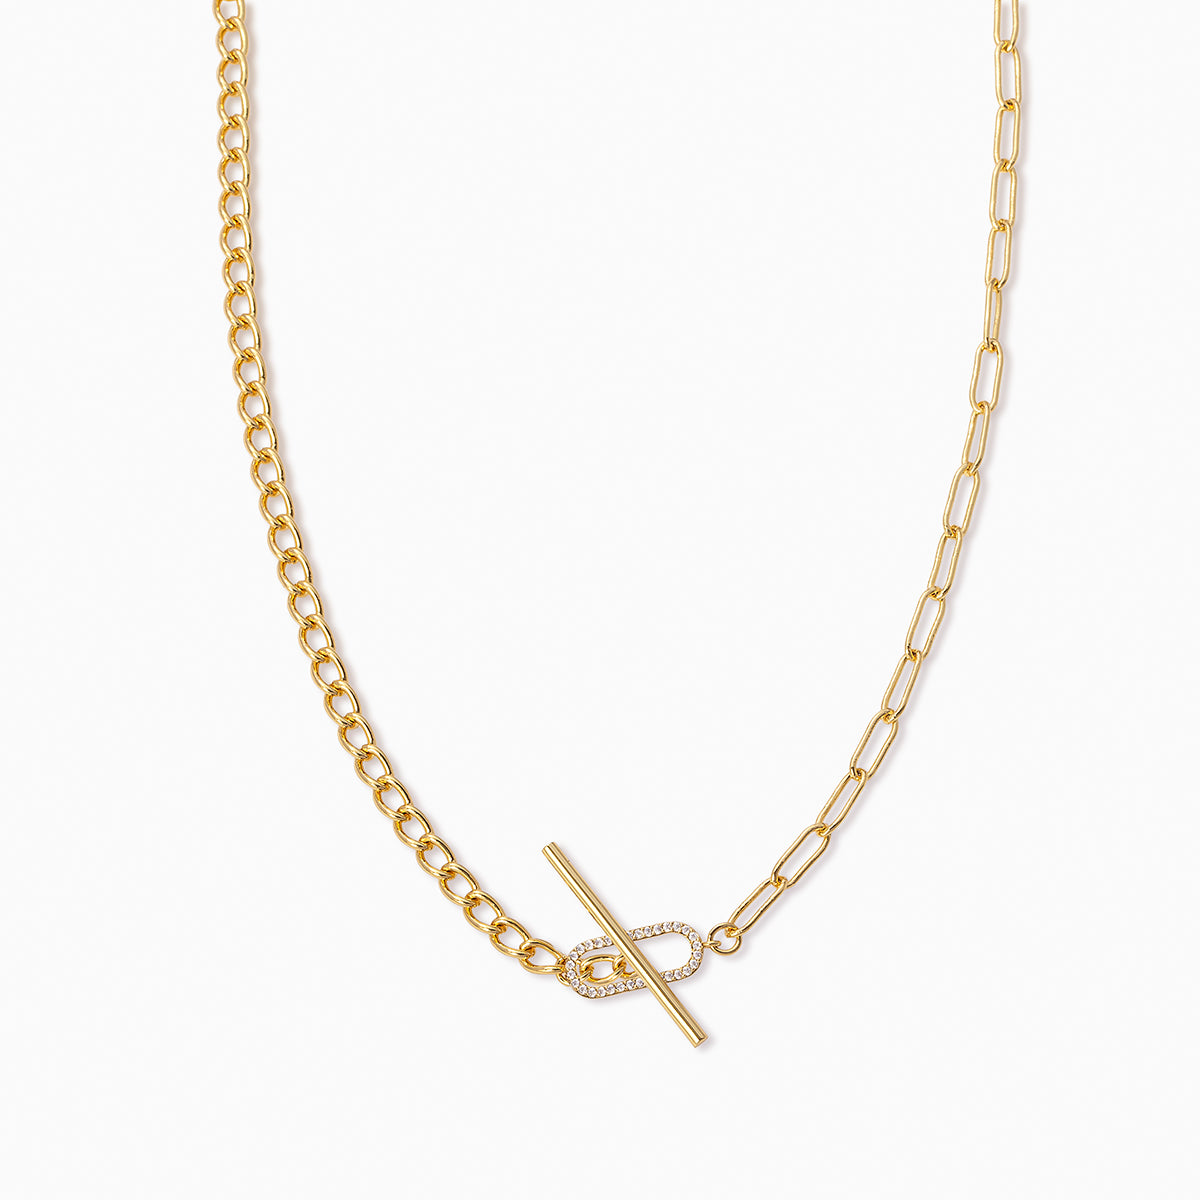 All in One Necklace | Gold | Product Image | Uncommon James 